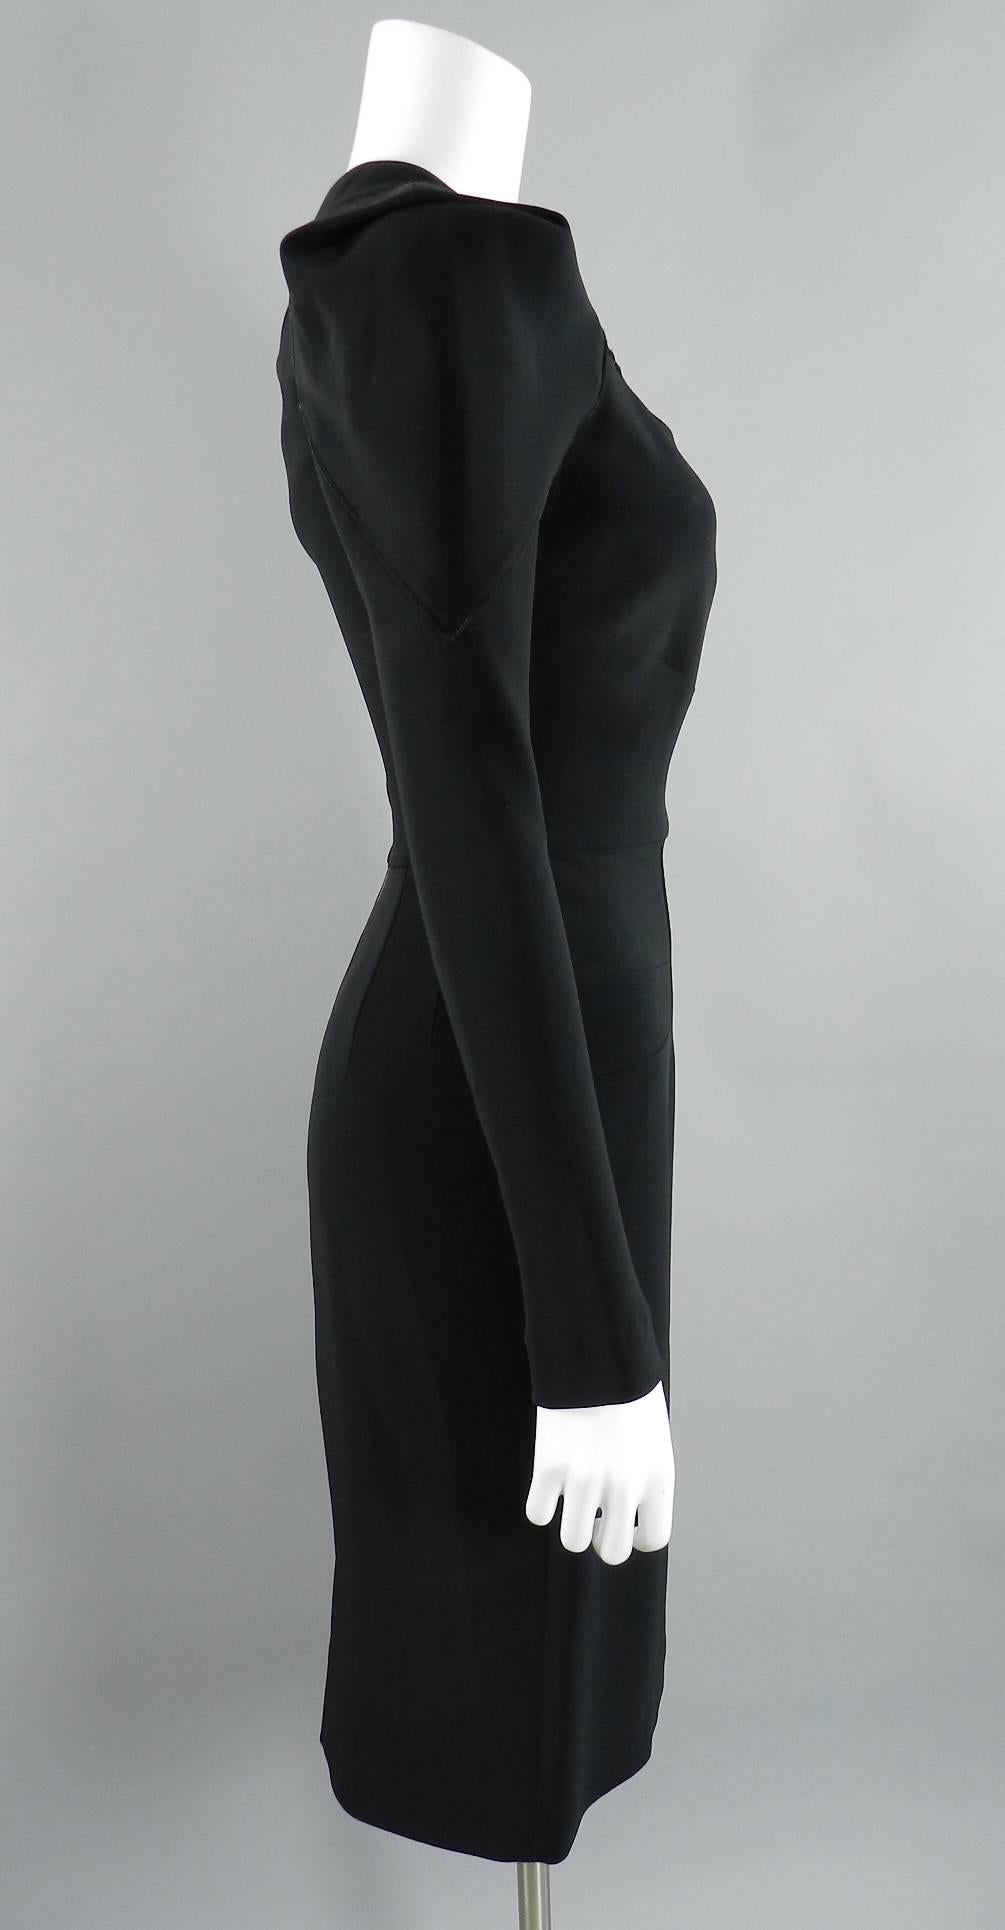 Roland Mouret black crepe long sleeve dress with zipper at back. Excellent pre-owned condition. Tagged size USA 8, Fr 40, IT 44. To fit 35